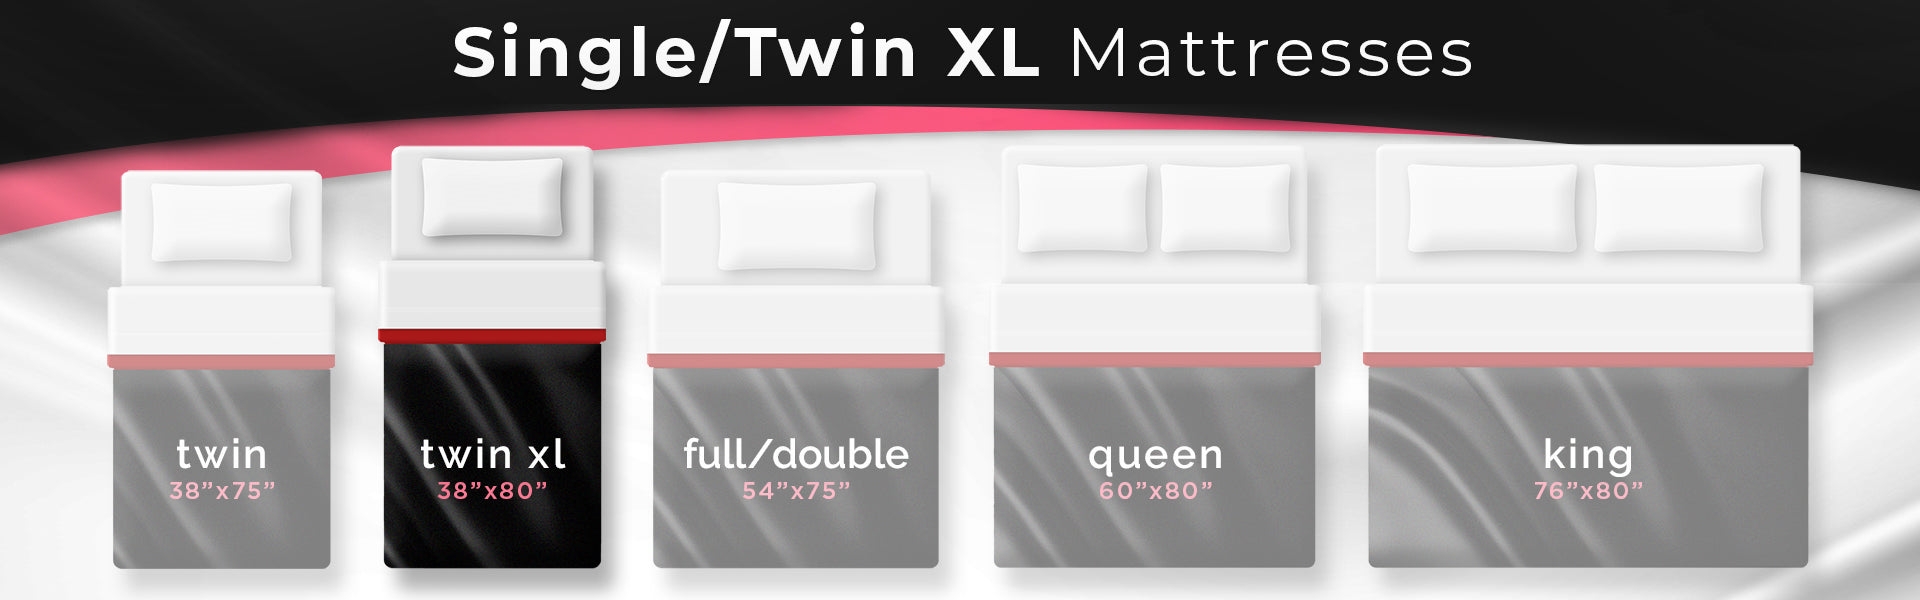 5 illustrated mattresses , single XL/twin XL size mattress dimensions highlighted 